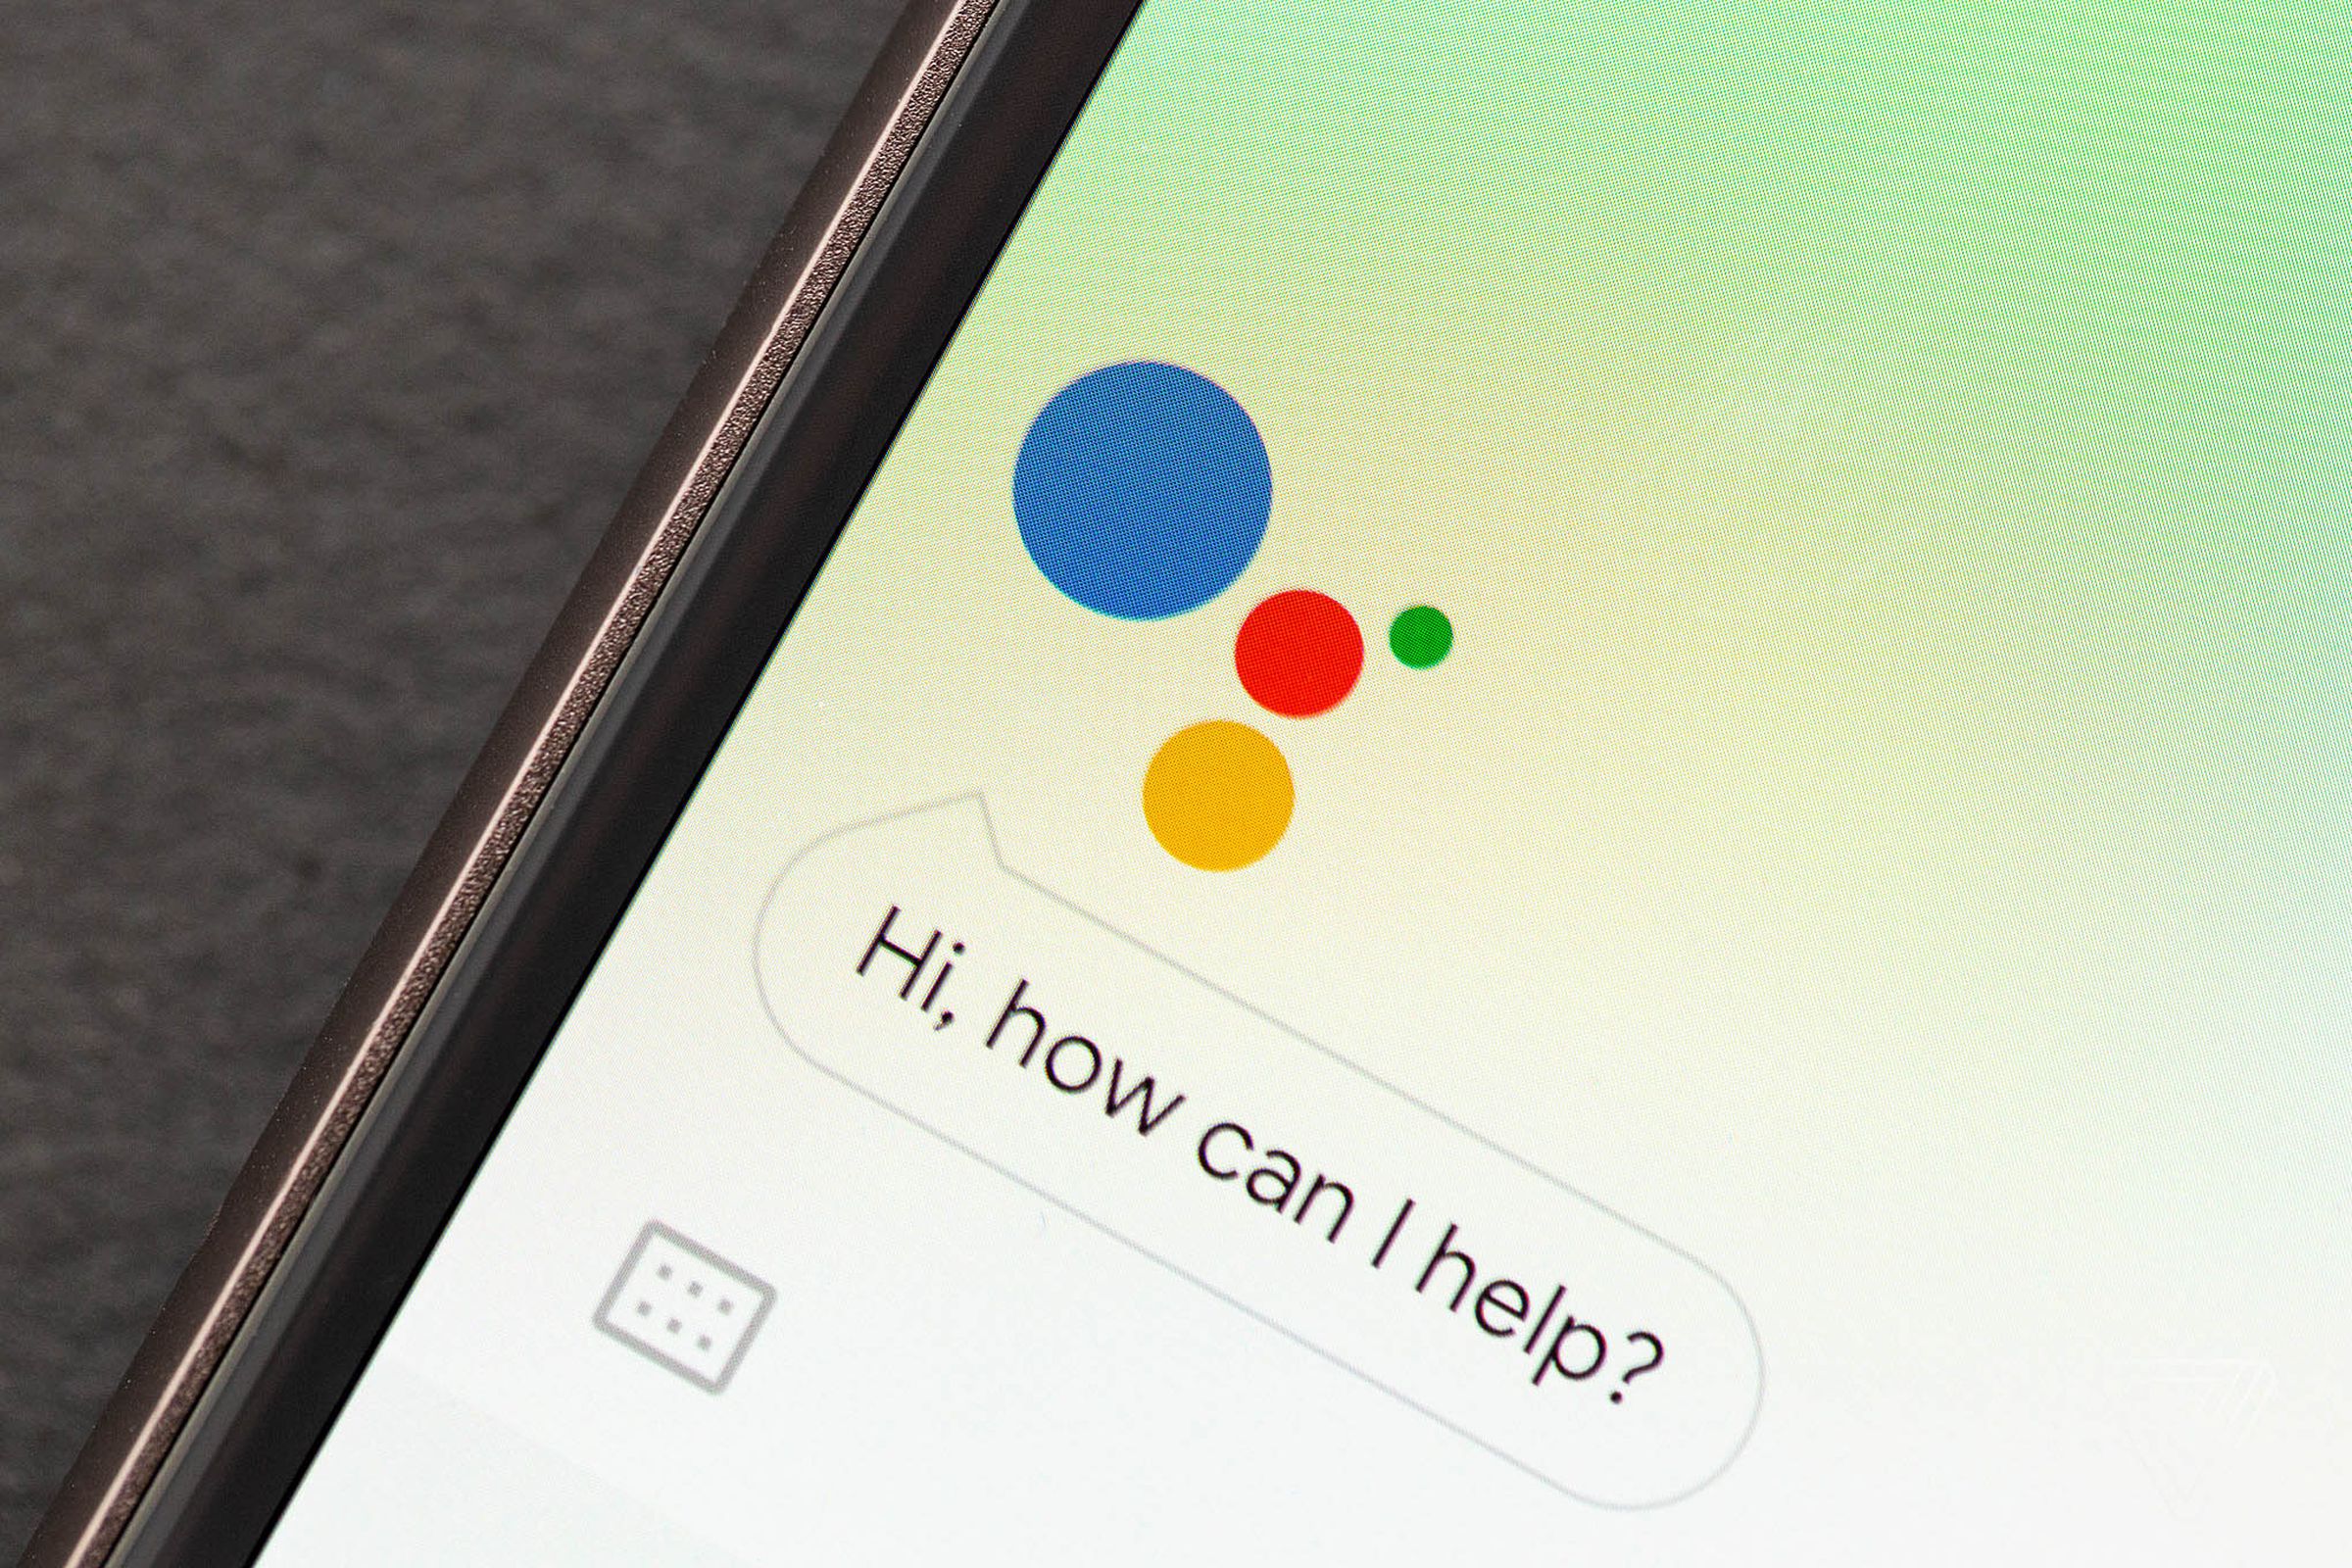 An image of the Google Assistant user interface asking “Hi, how can I help?”